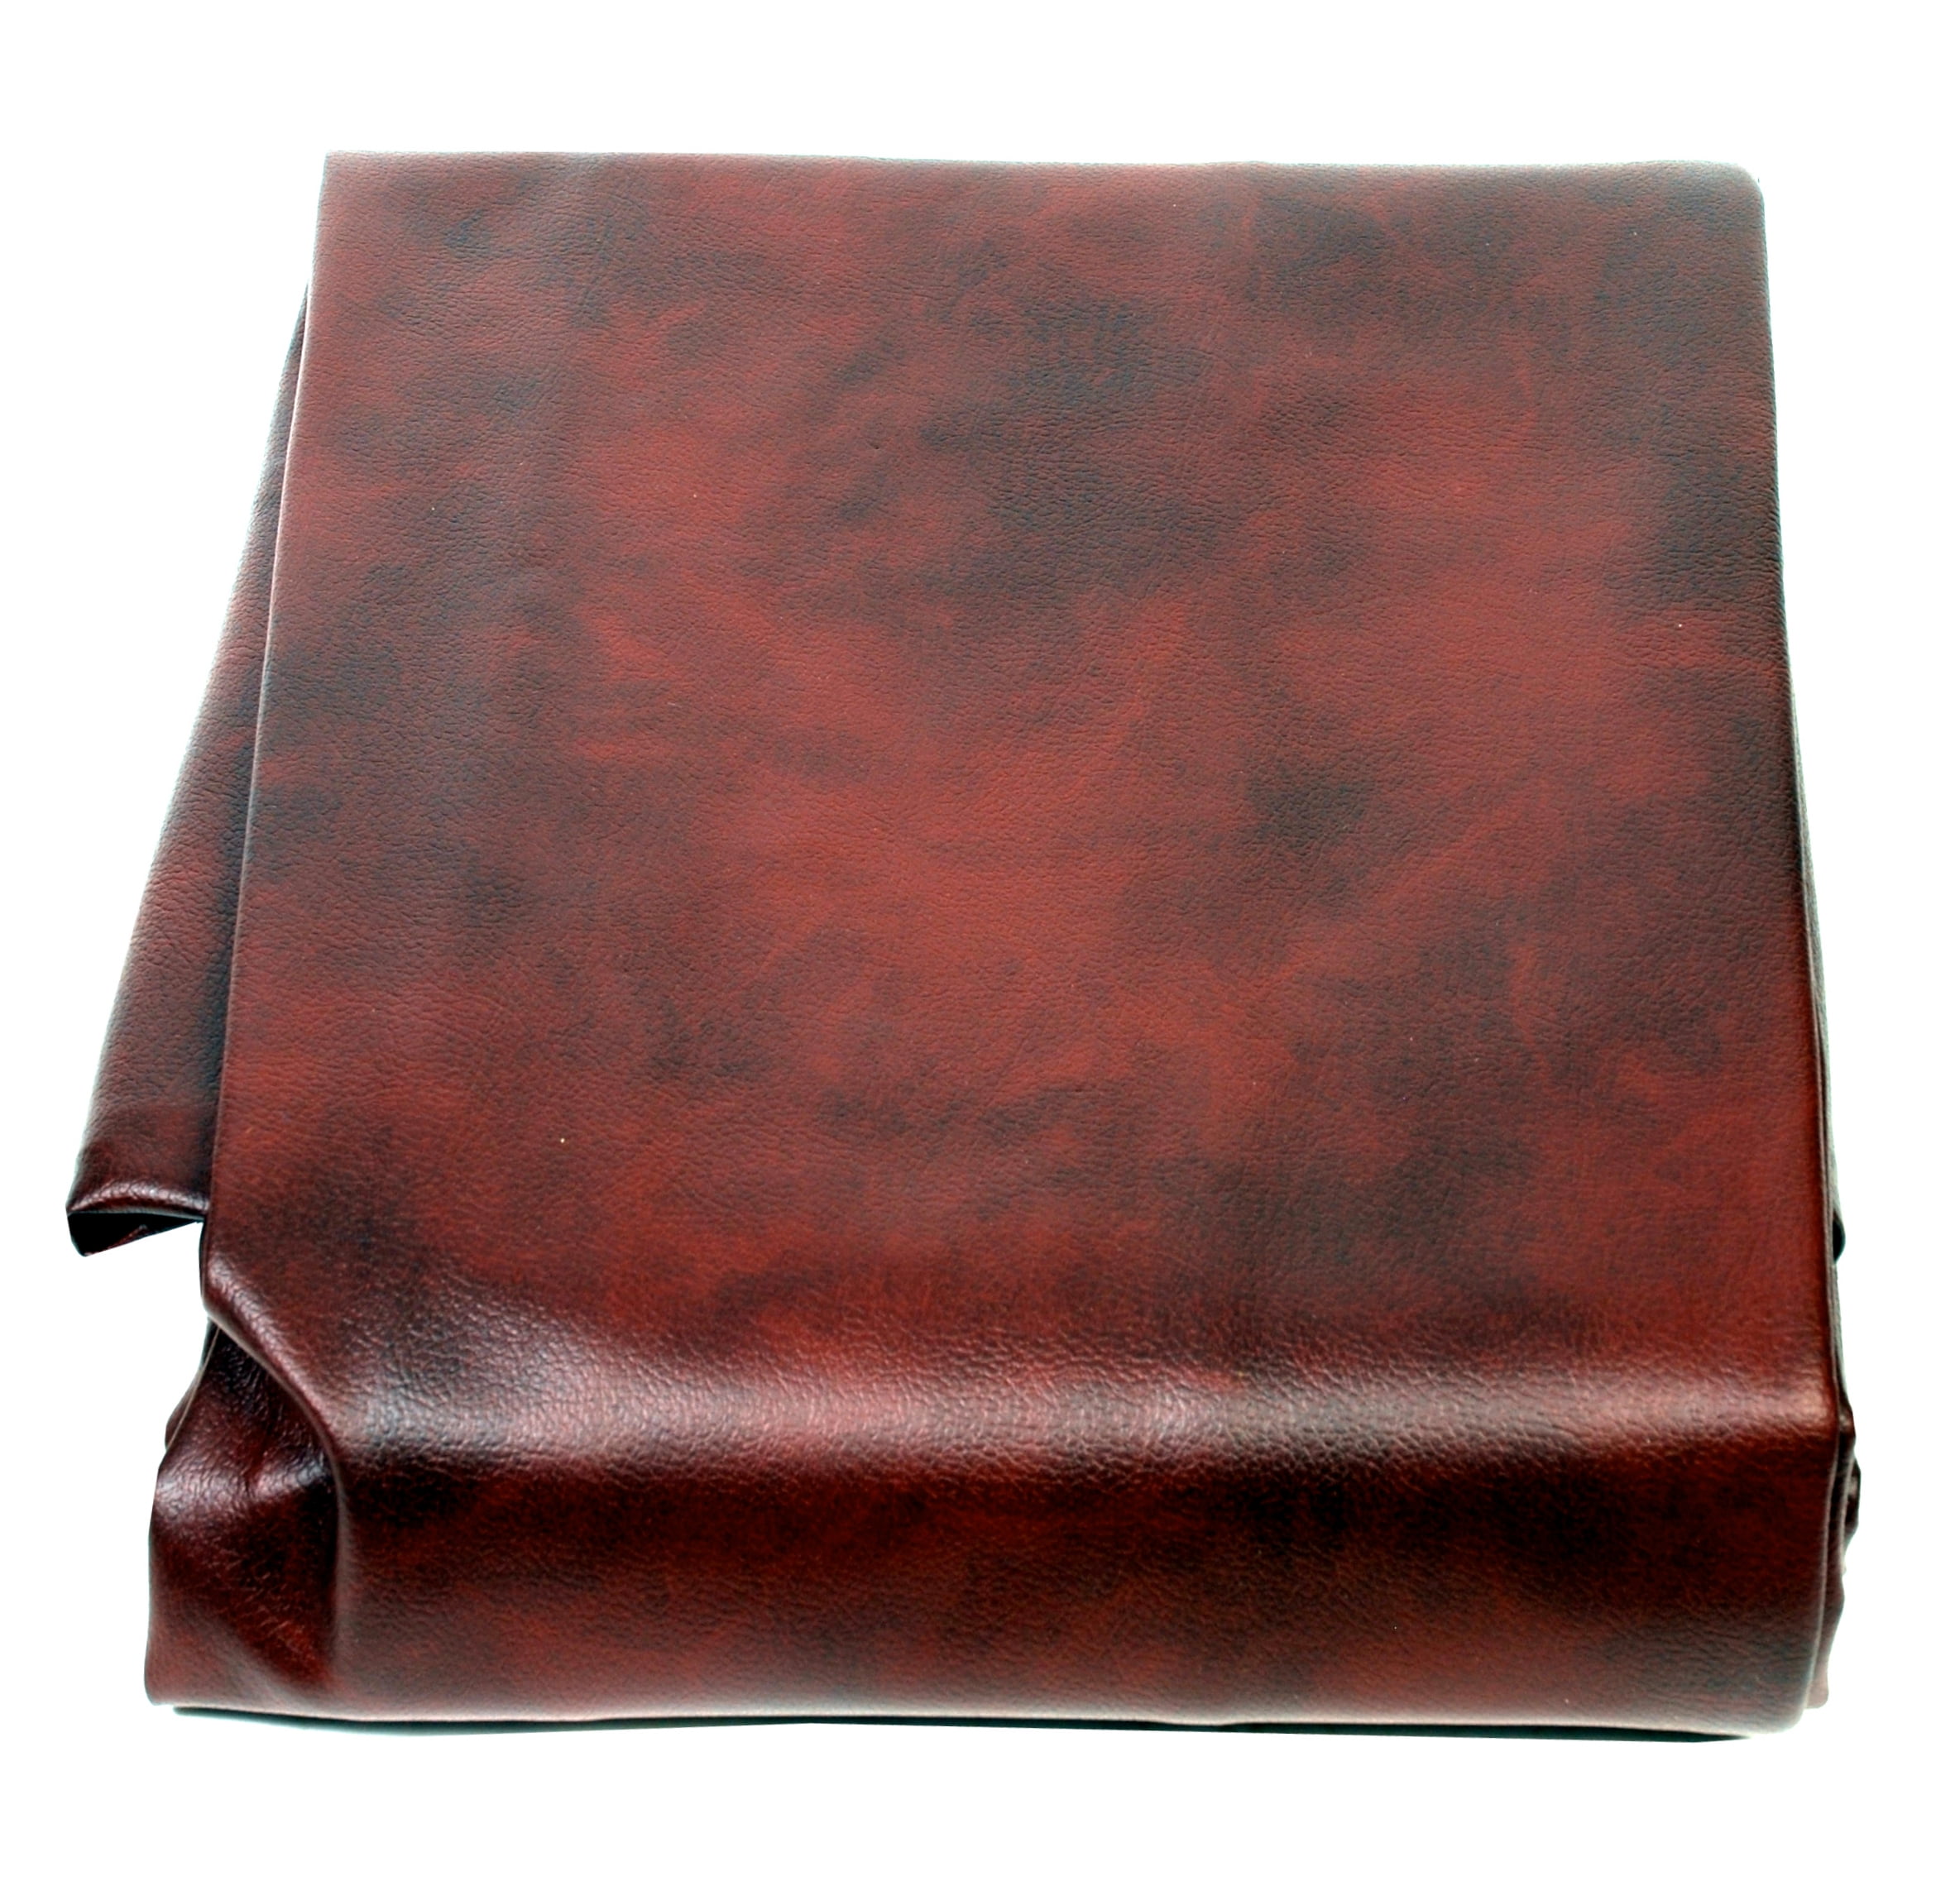 Black Pool Table Cover 8 foot Heavy Duty Leatherette Thick Billiard Table Cover 